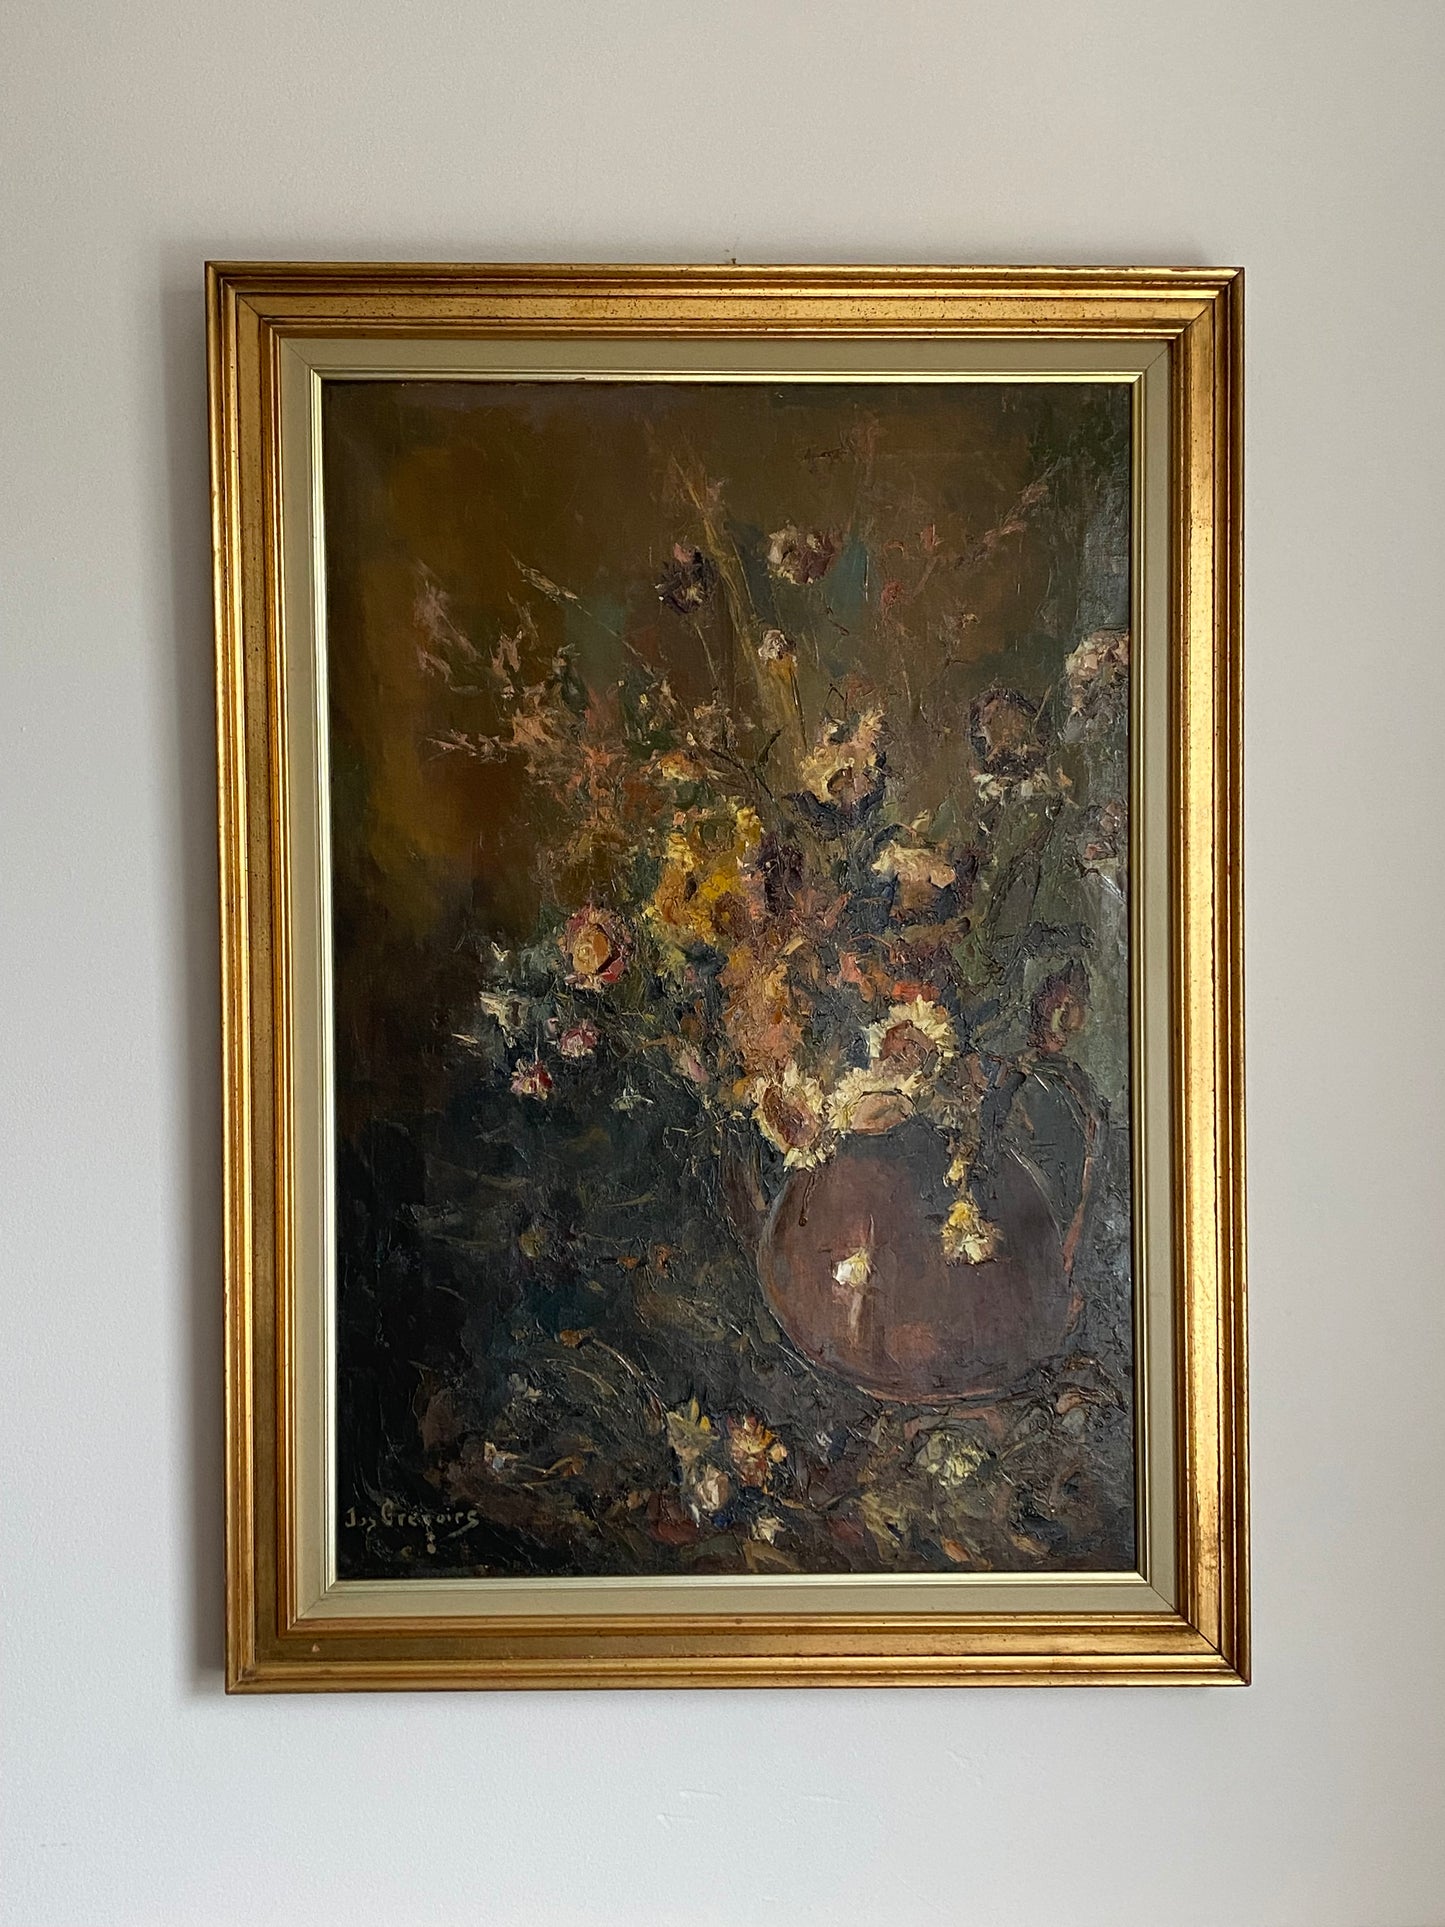 SALE - Jos. Gregoirs Brown Kettle Floral Oil on Canvas